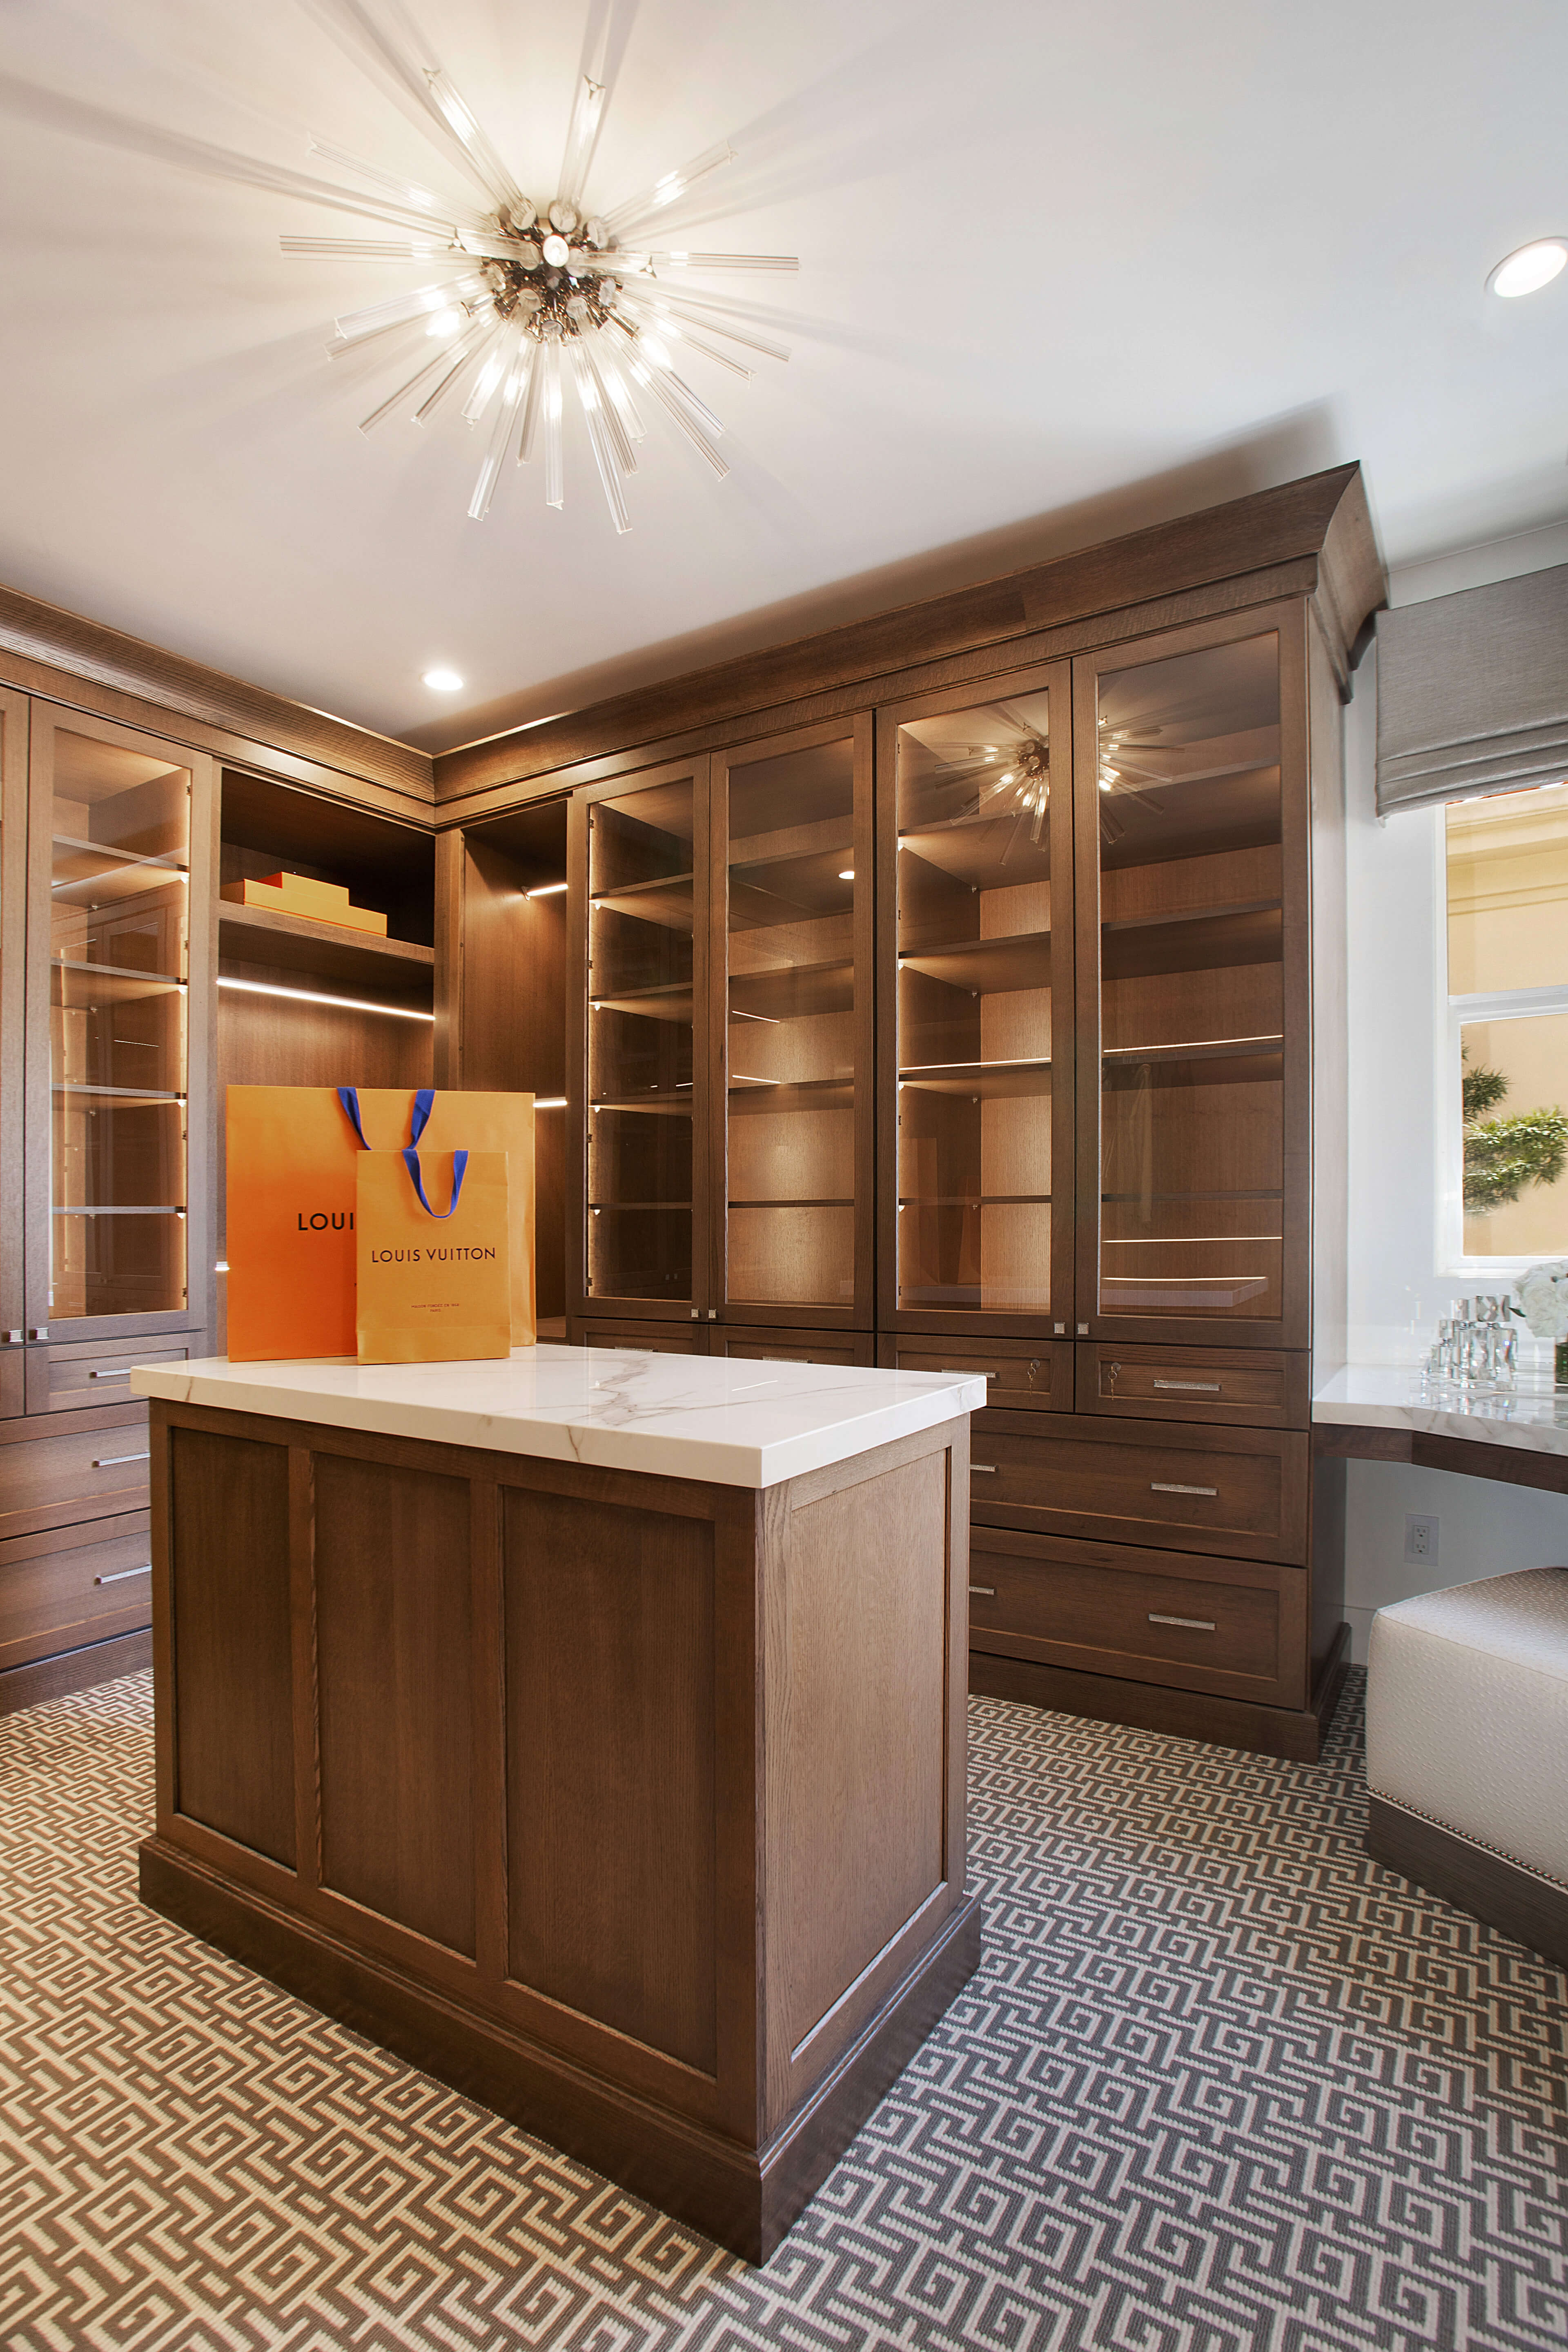 A custom walk-in closet design with an island, shelves for shoe, and an angled corner desk and beauty station.